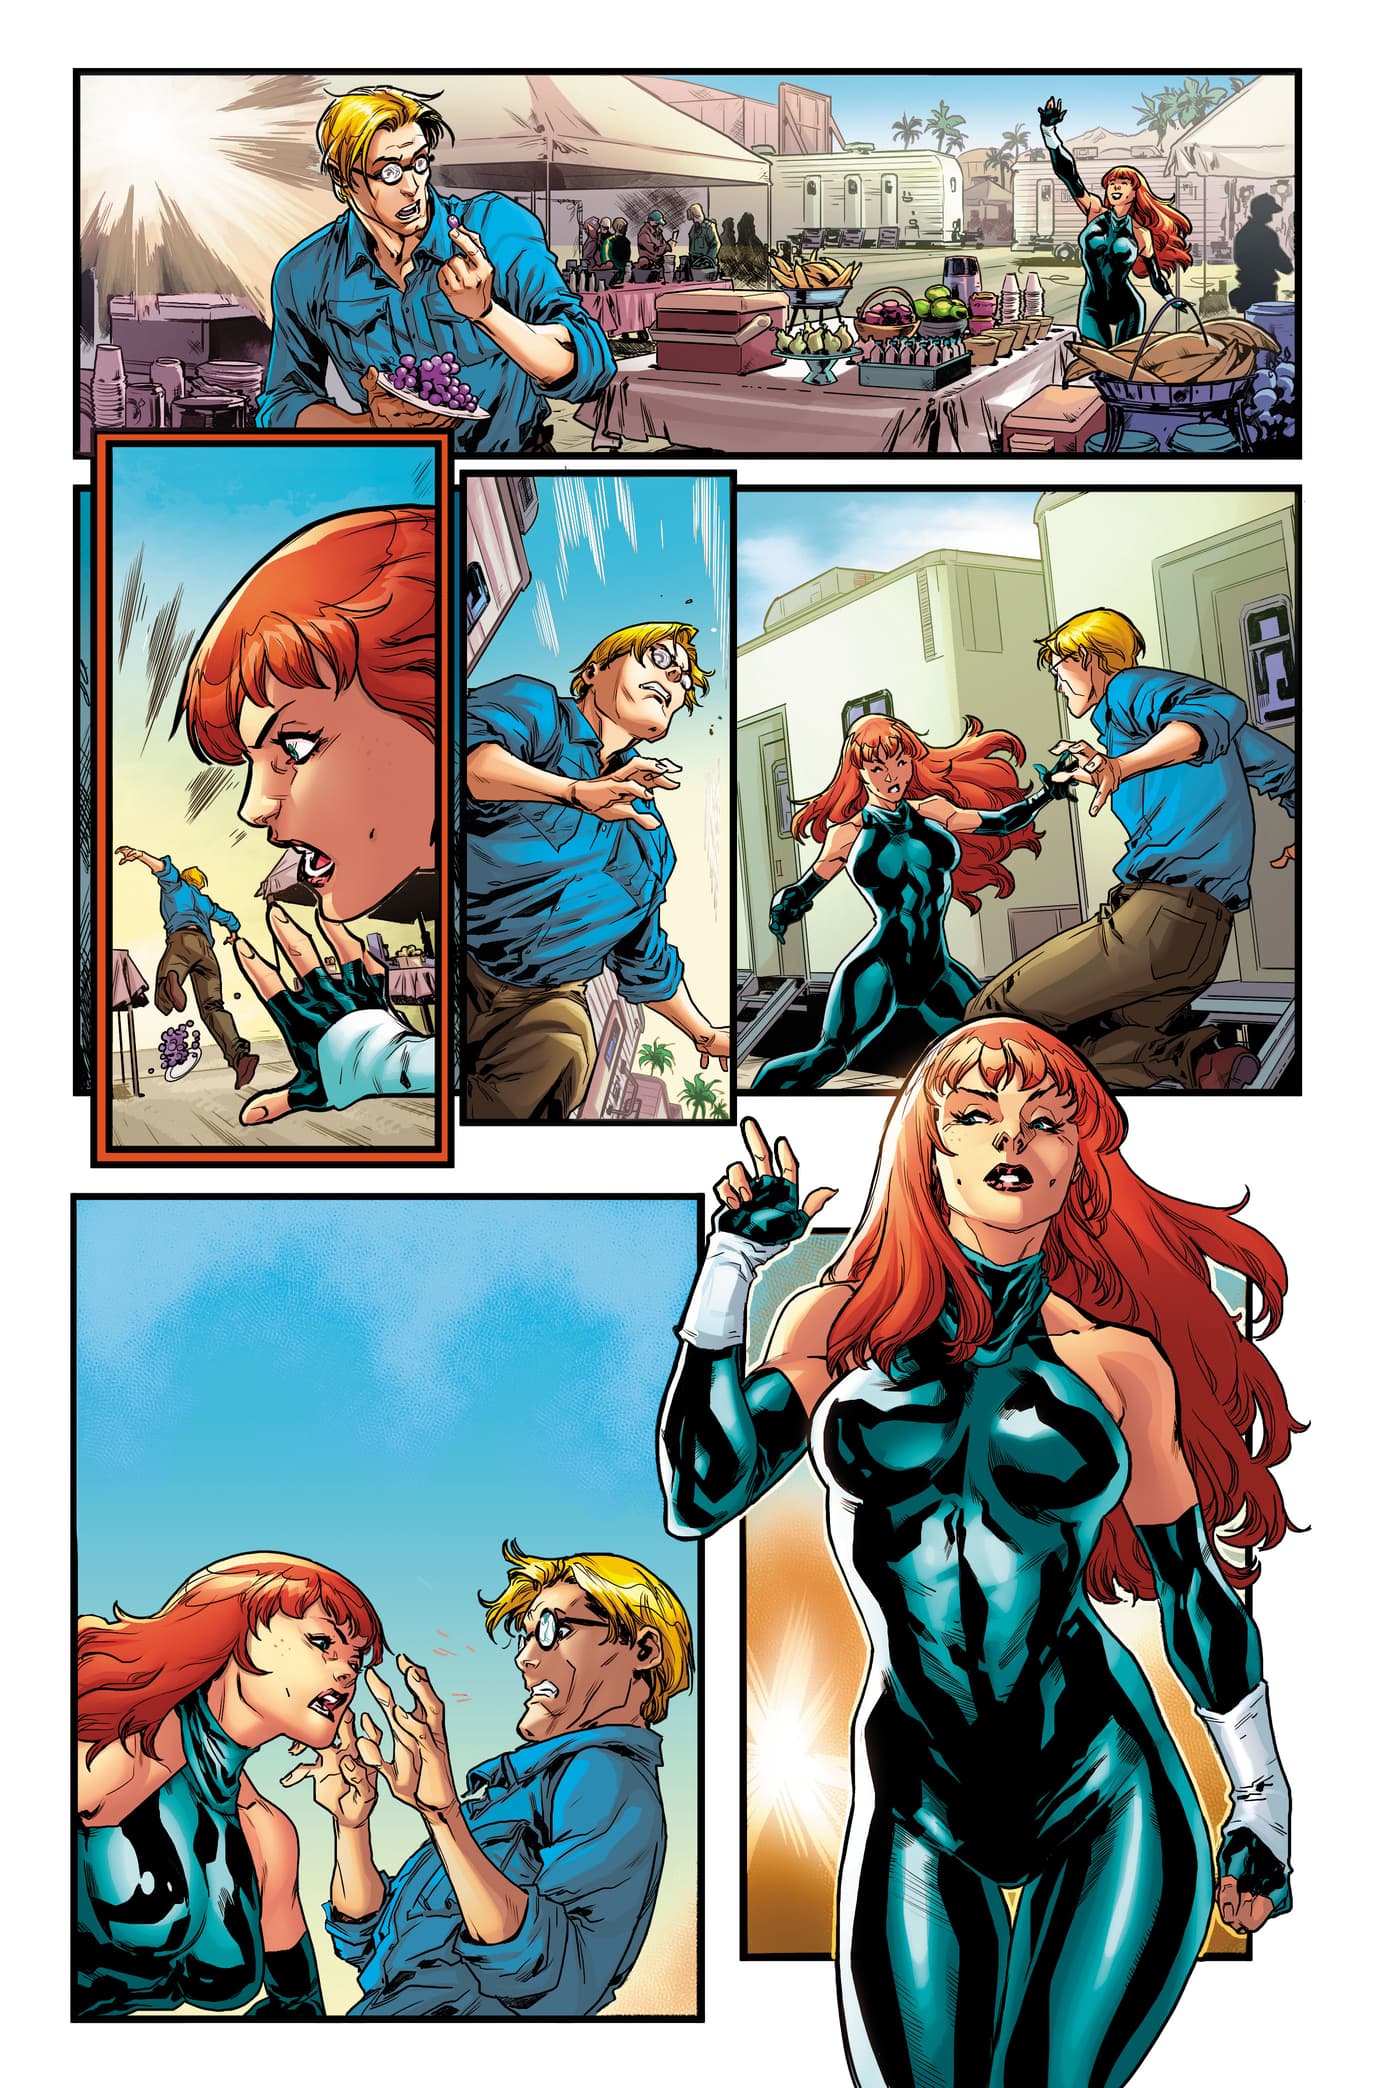 Page from Amazing Mary Jane #1